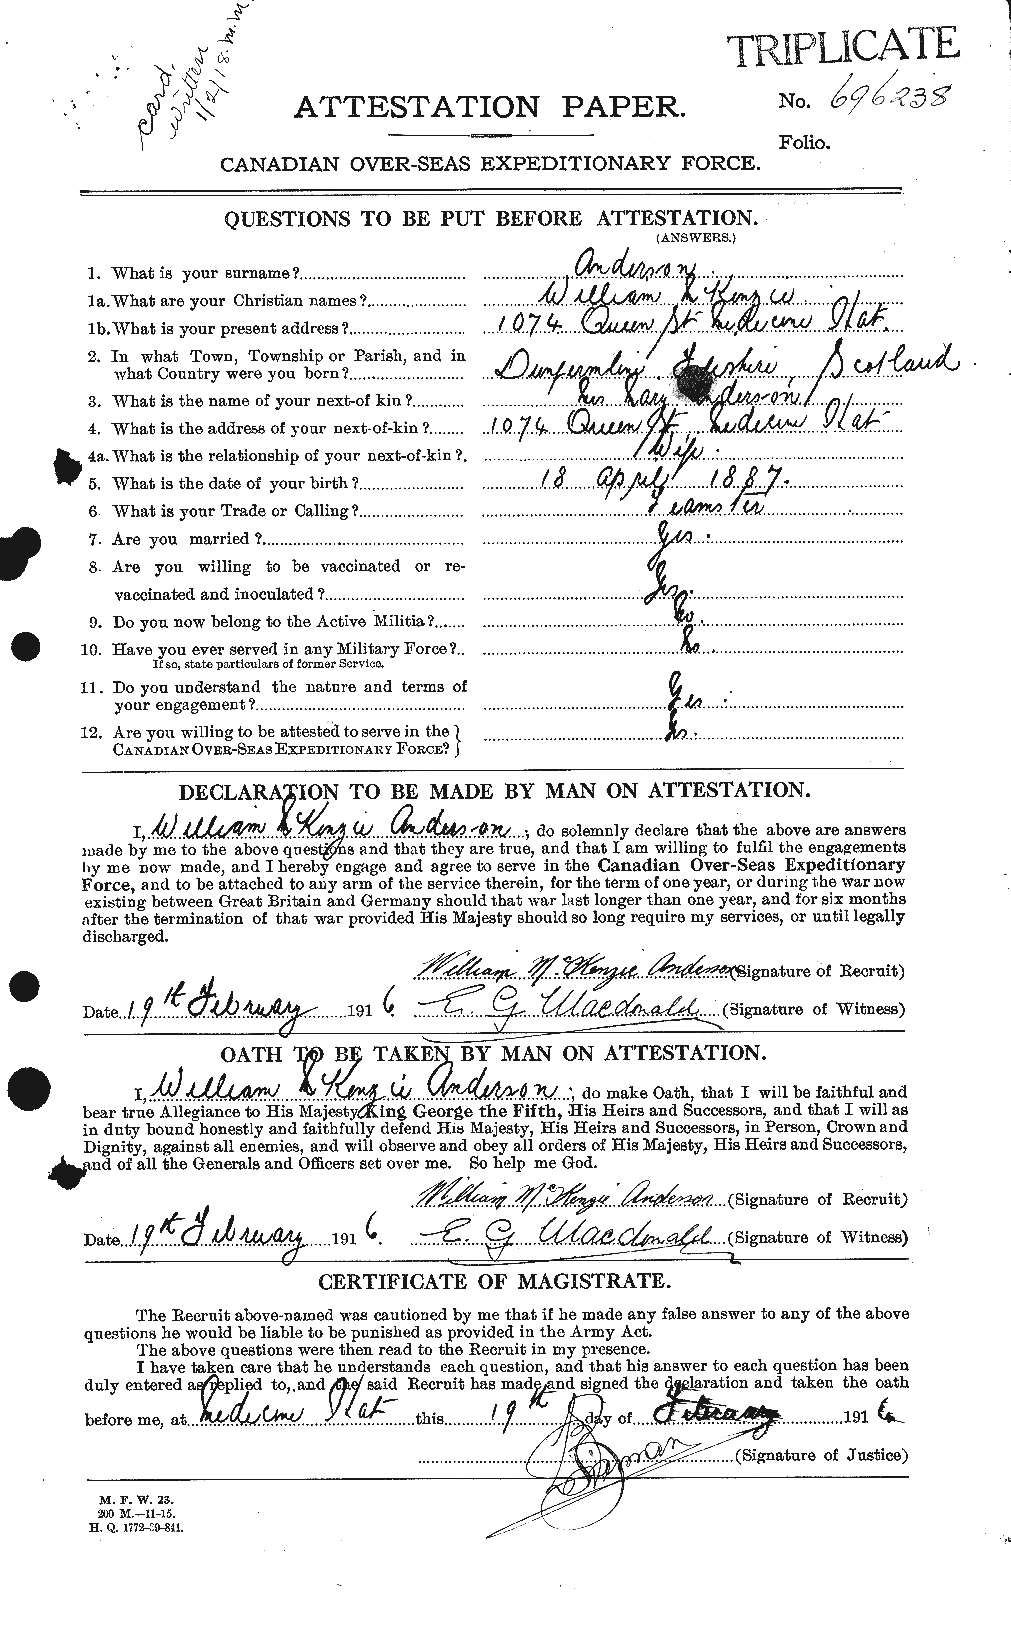 Personnel Records of the First World War - CEF 210833a